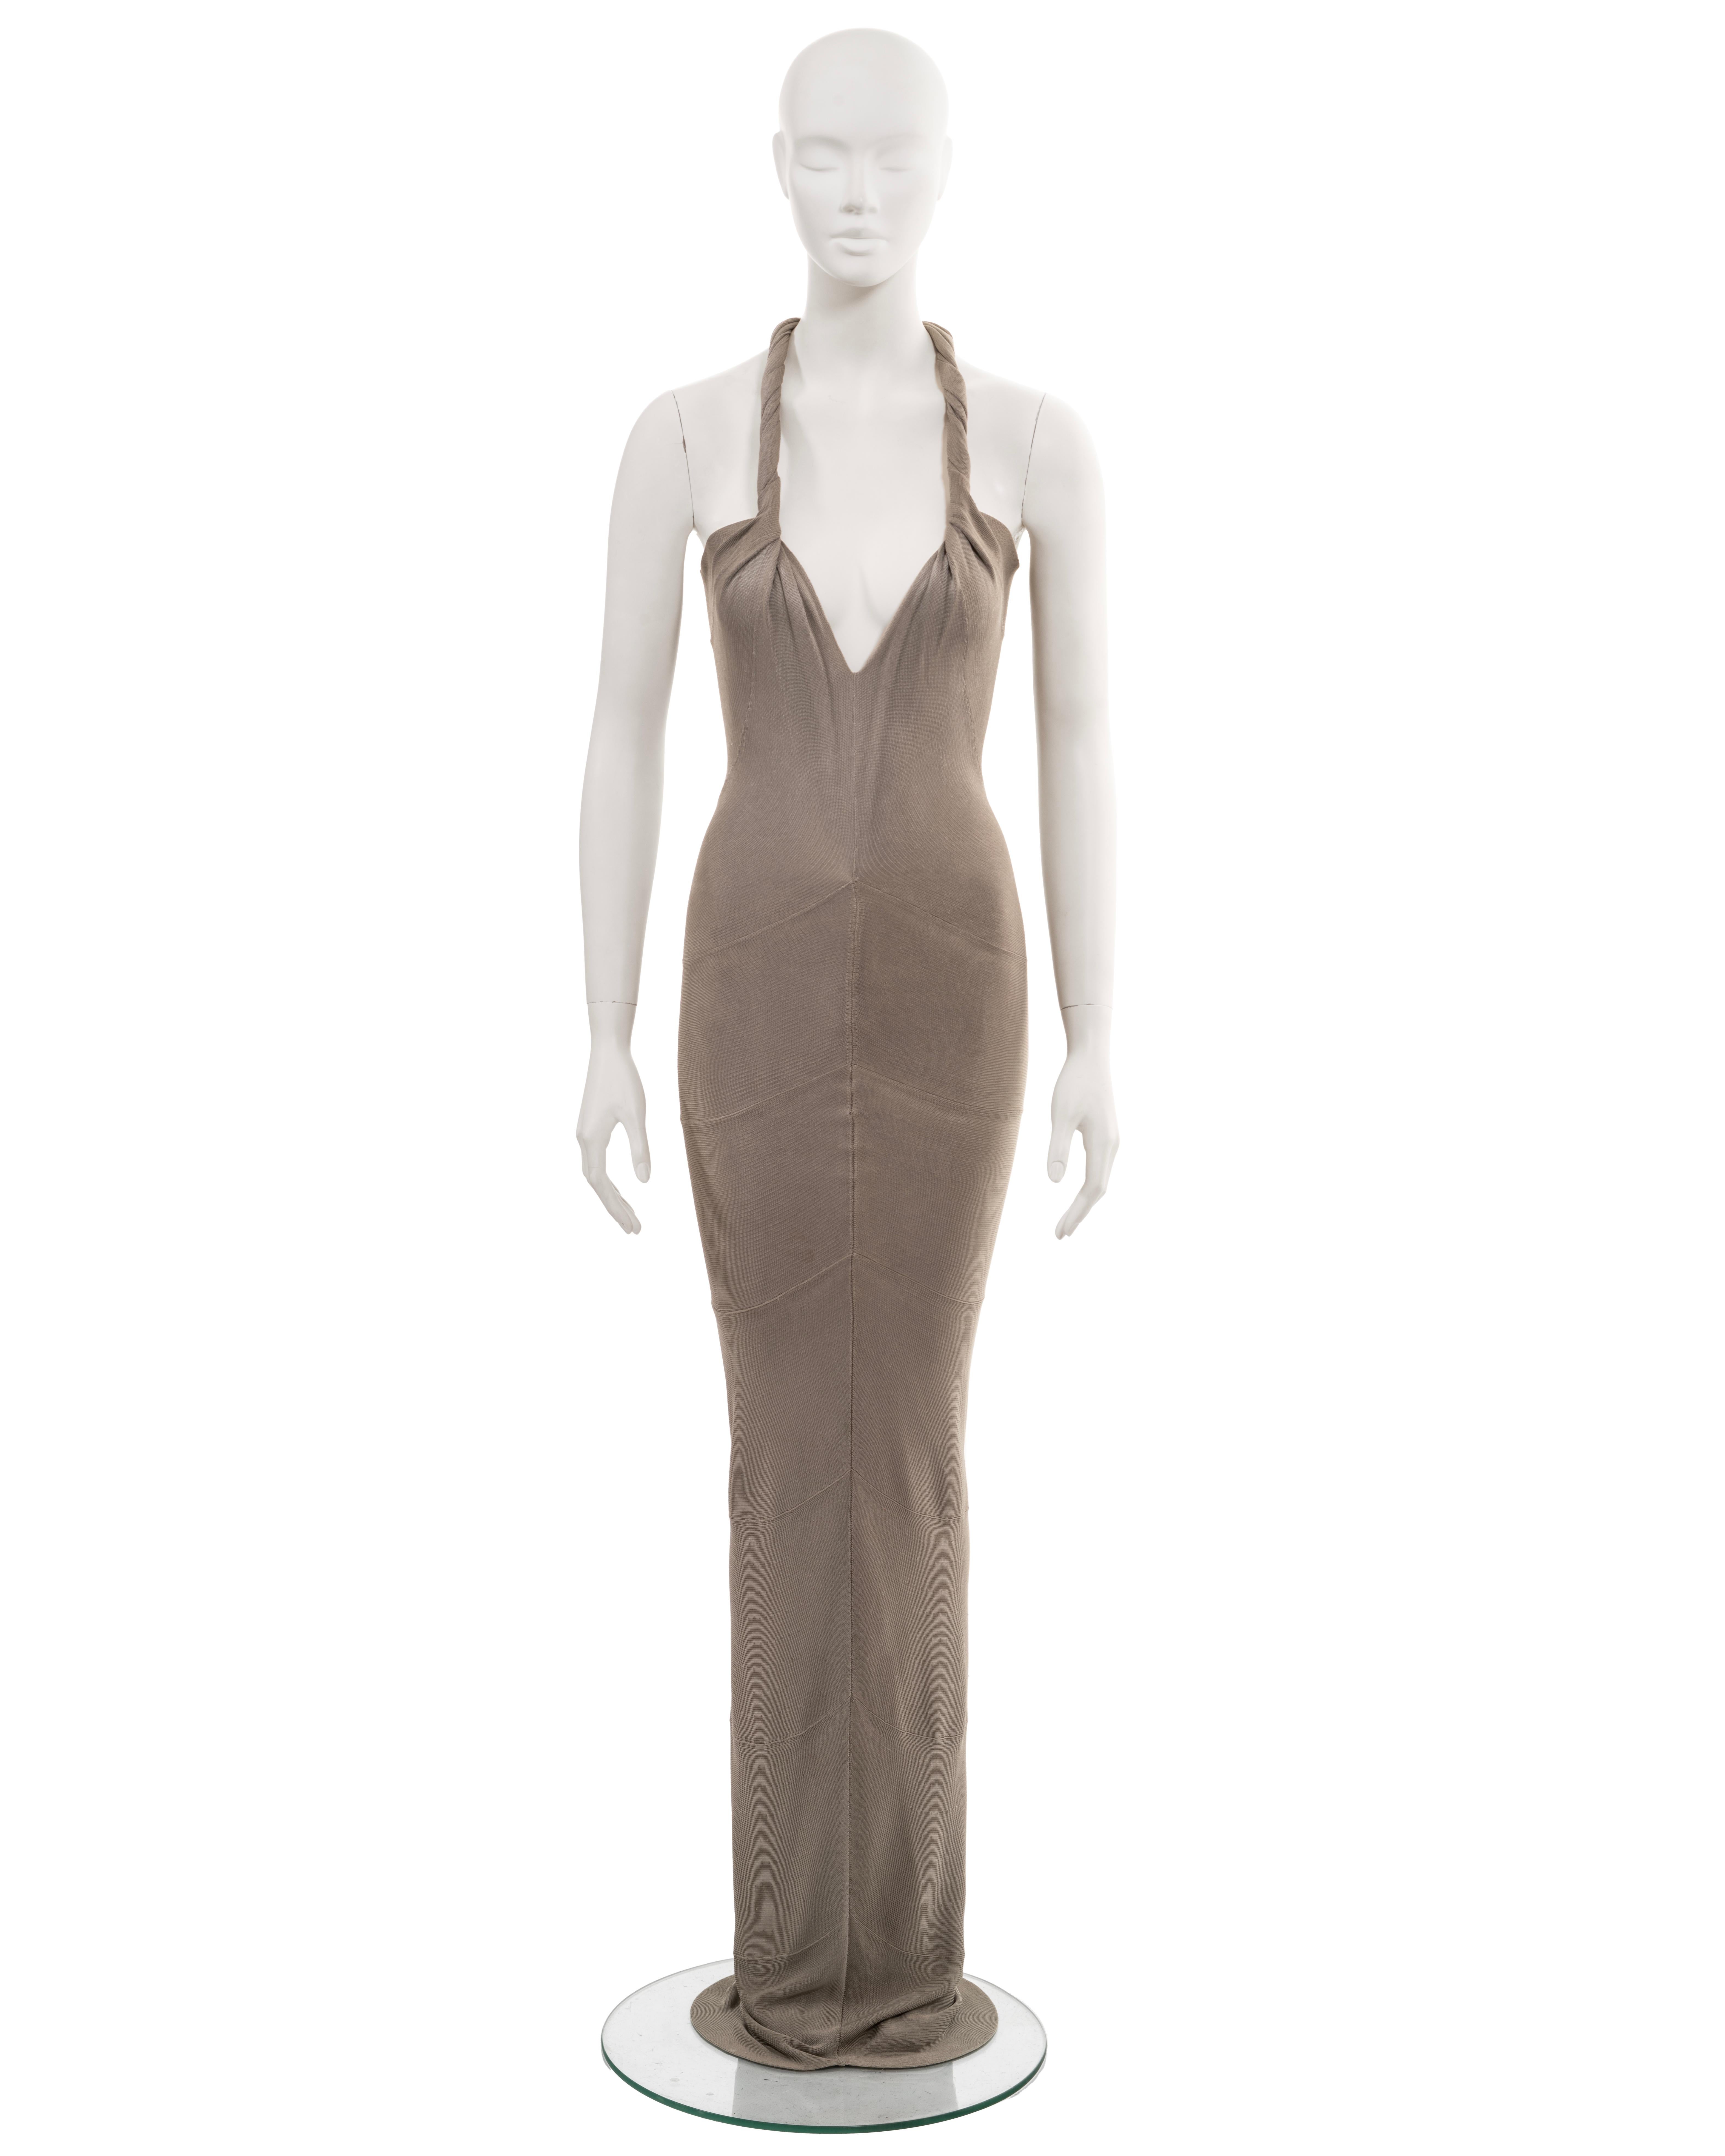 ▪ Giorgio Armani bandage evening dress
▪ Spring-Summer 2006
▪ Stone-grey jersey 
▪ Plunging v-neck
▪ Twisted shoulder straps 
▪ Figure-hugging 
▪ Multi-panelled floor-length wiggle skirt
▪ IT42 - FR38 - UK10 - US6 (runs small)
▪ Made in Italy

All